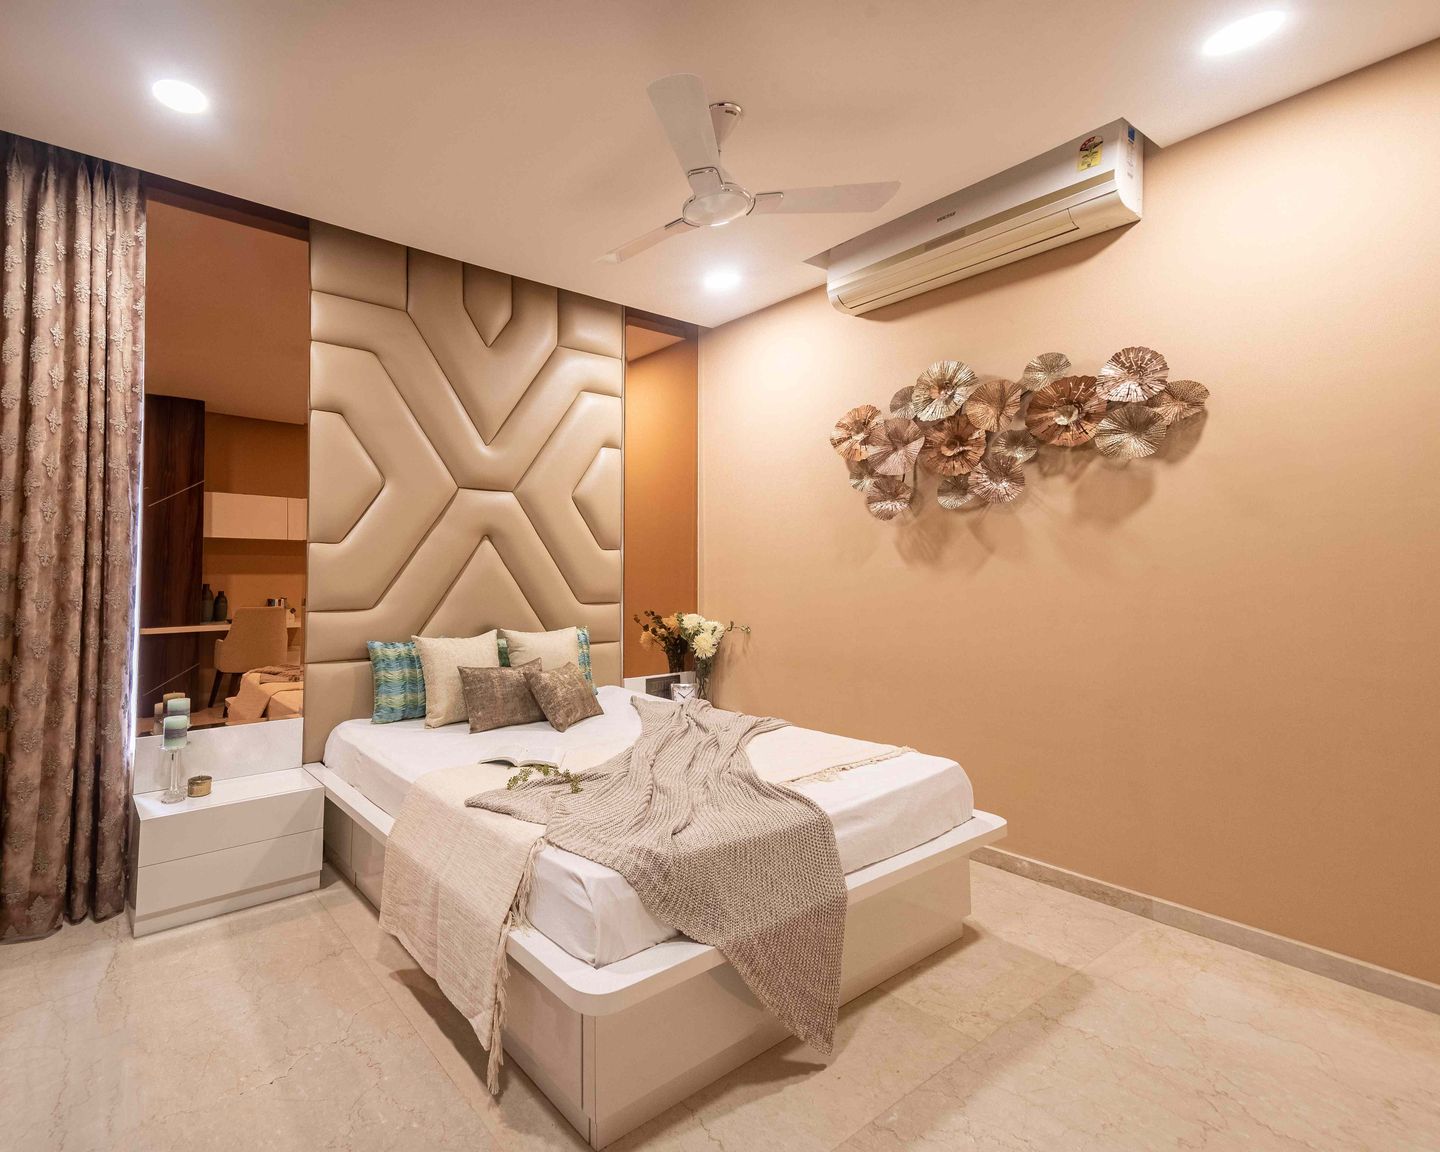 Contemporary Bedroom Wall Design With Textured Paint